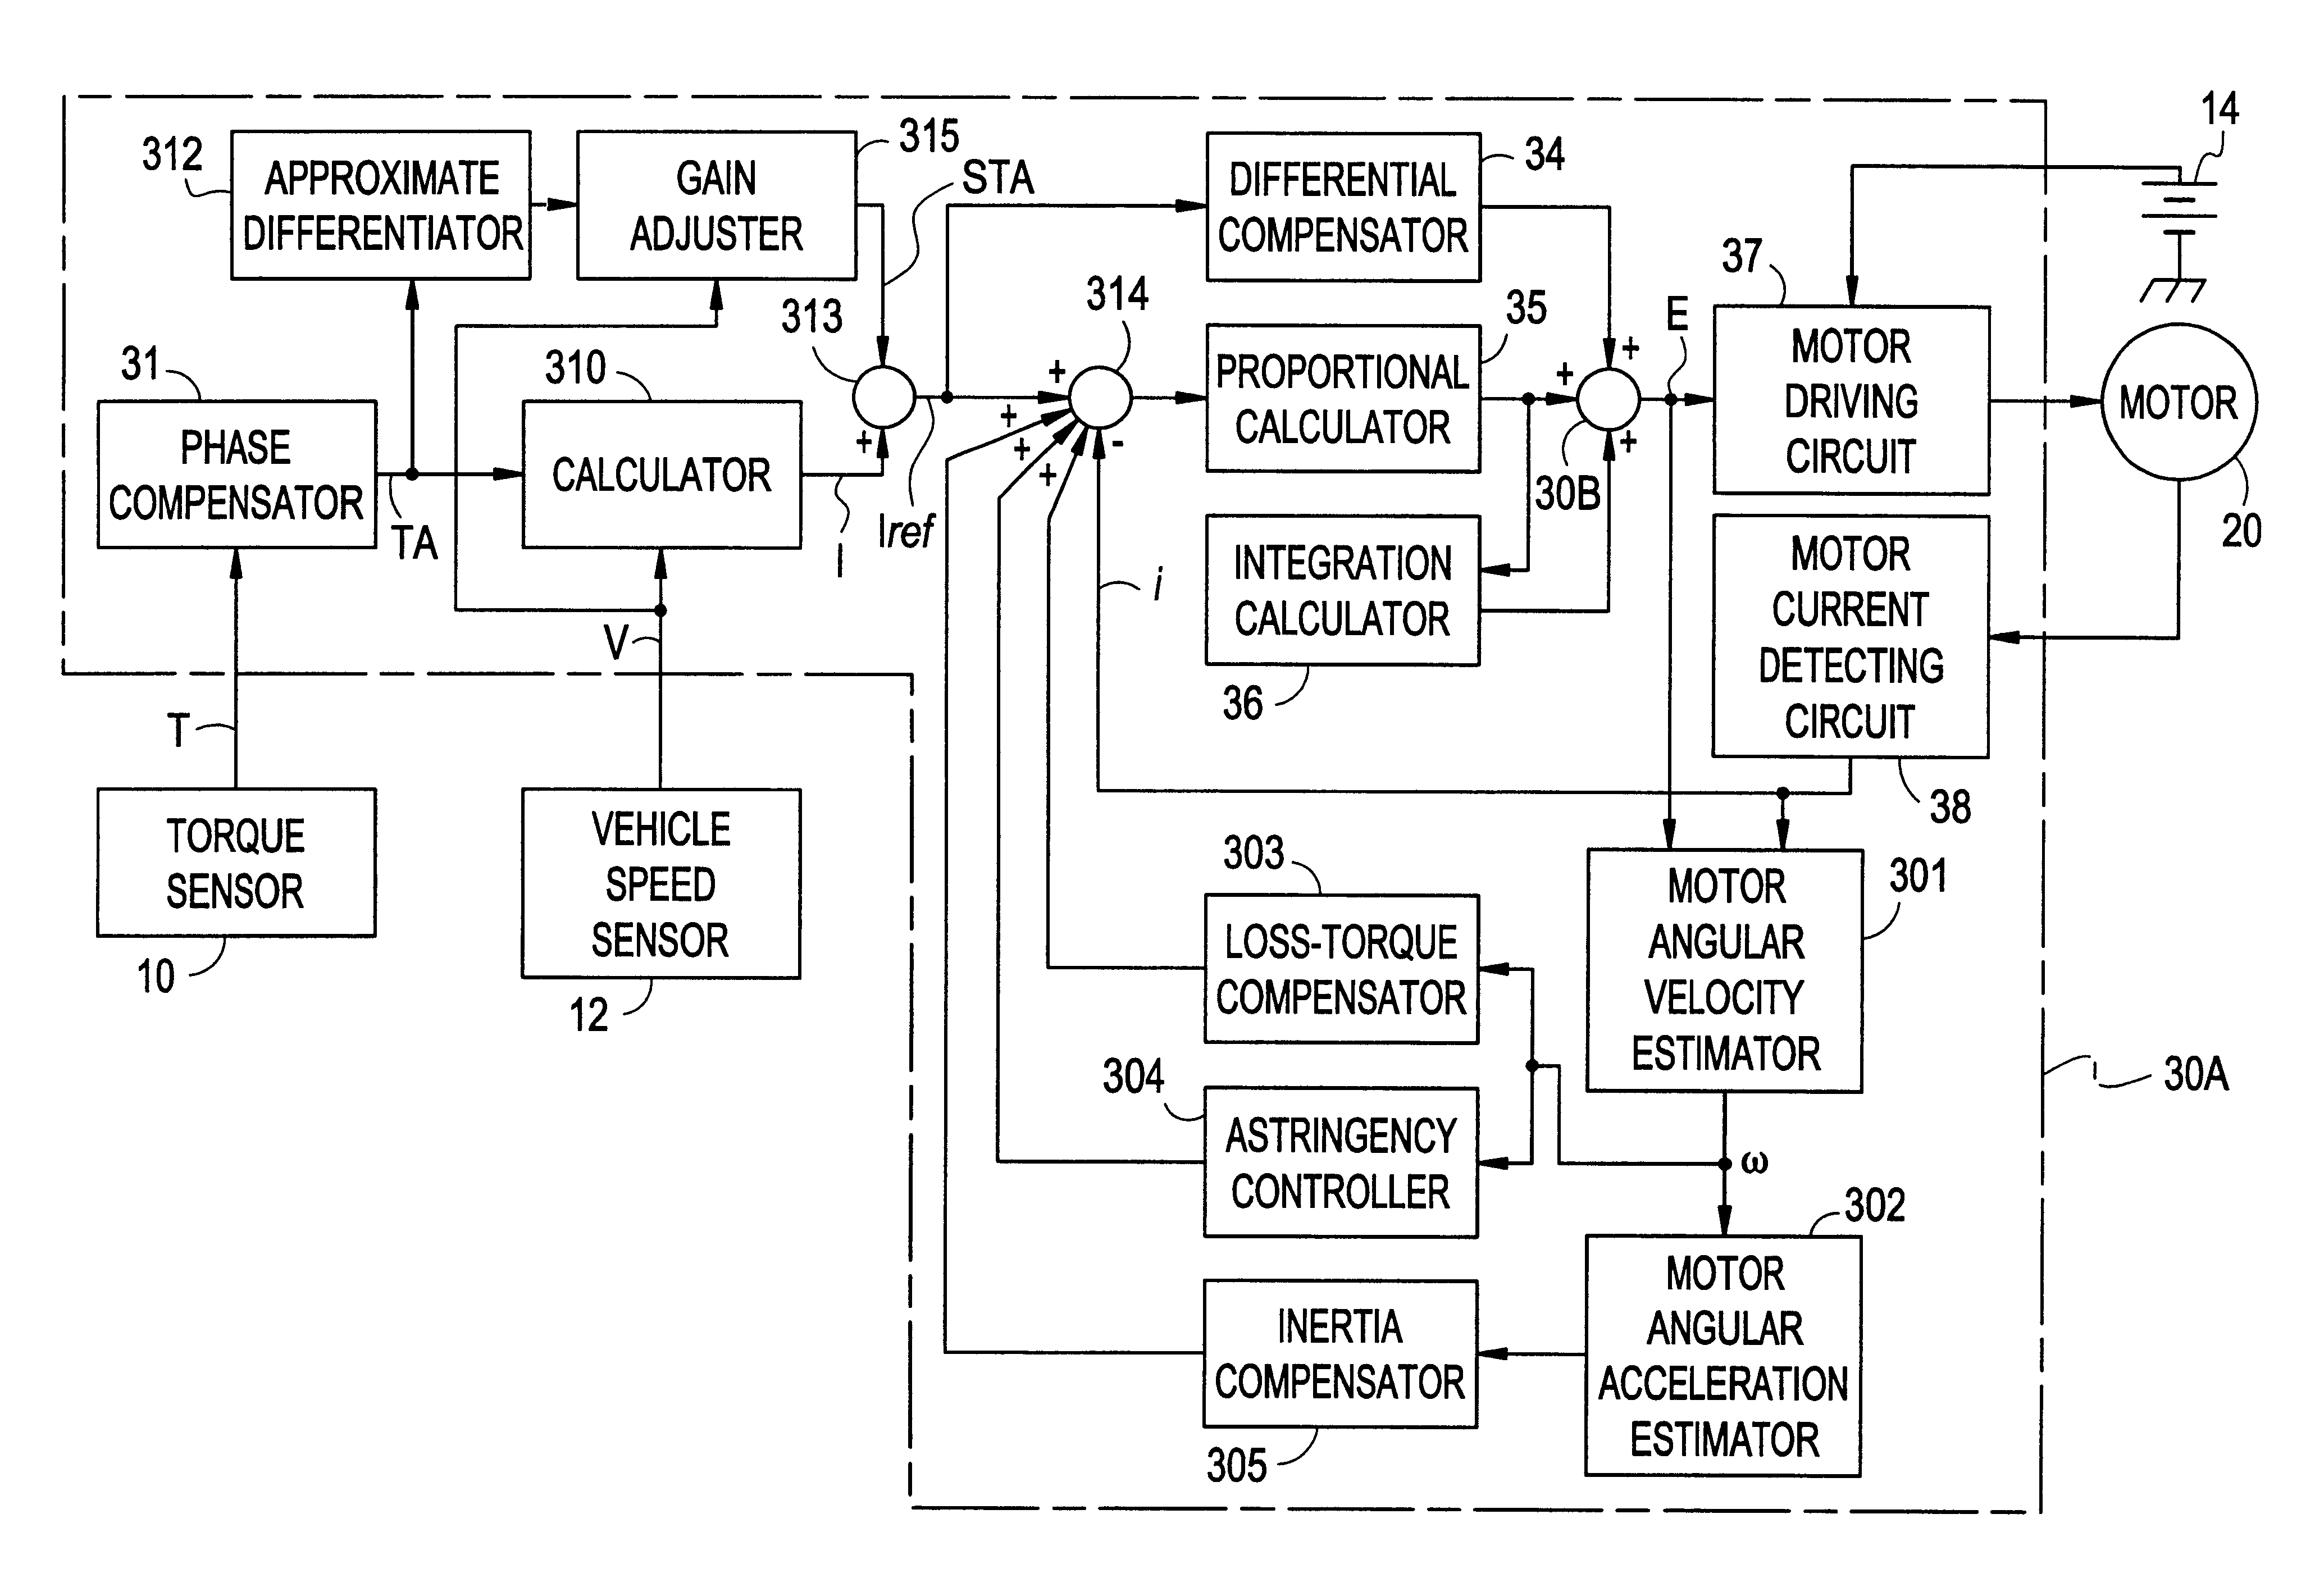 Controller for motor power steering system